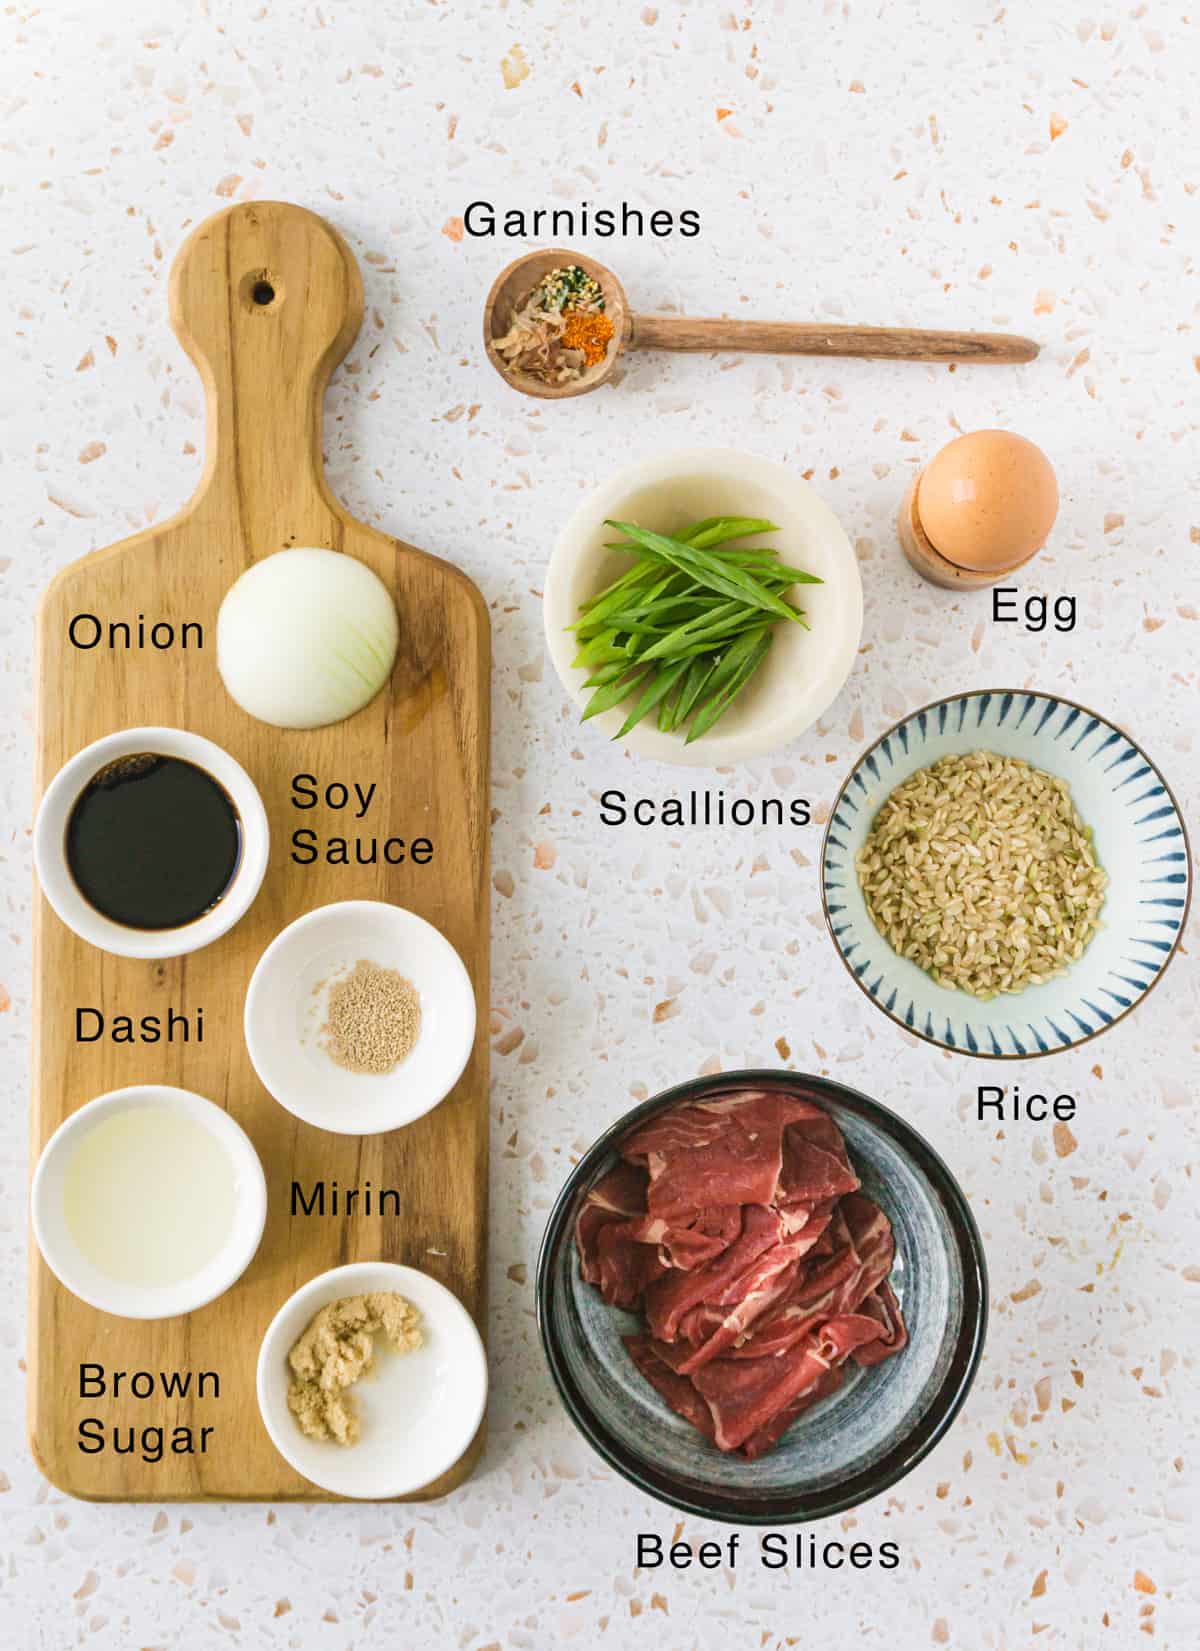 Labeled ingredients for the recipe laid out on the table.